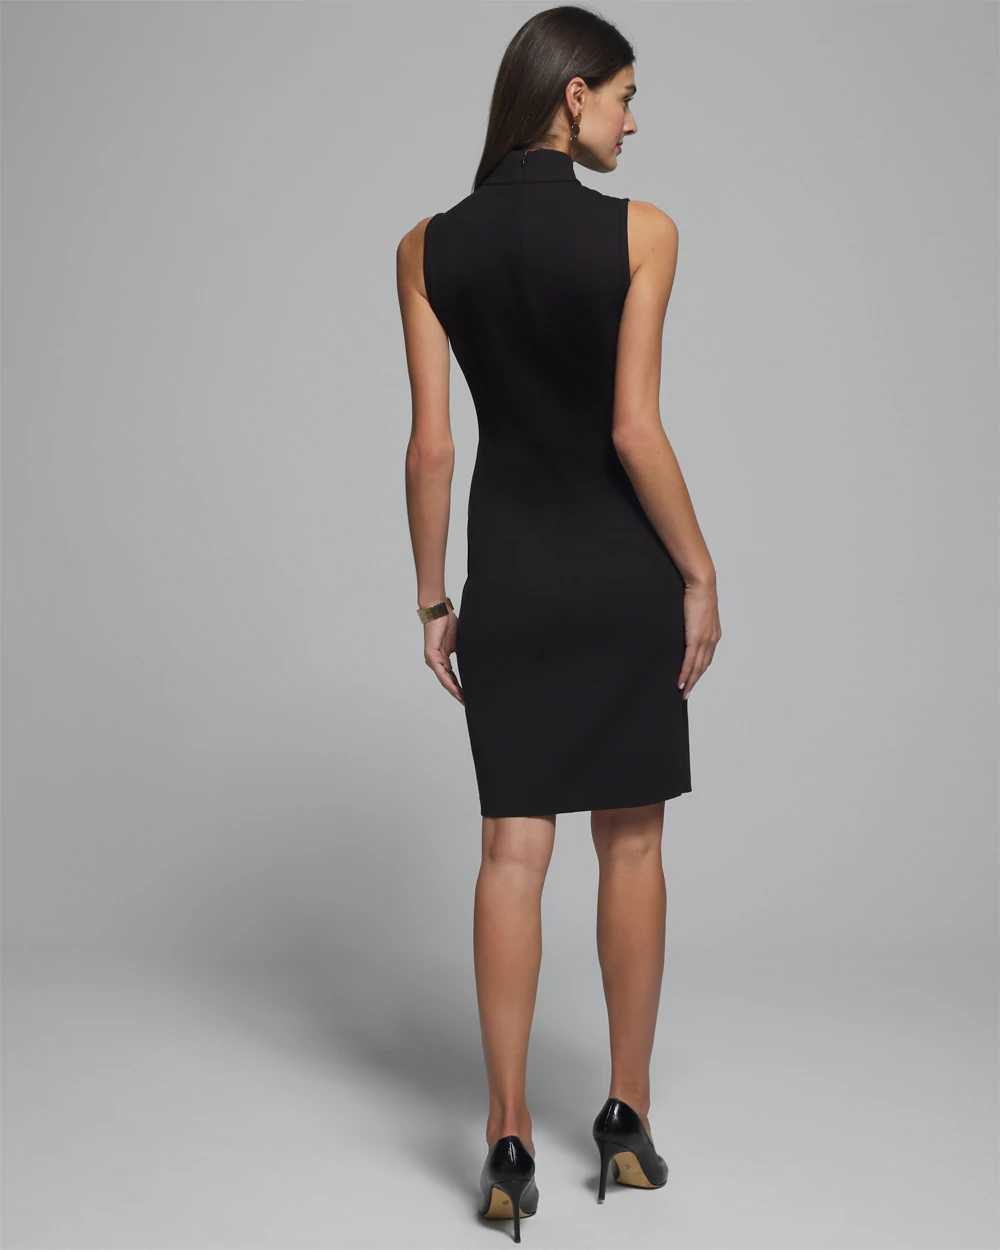 Outlet WHBM Sleeveless Cutout Midi Dress click to view larger image.